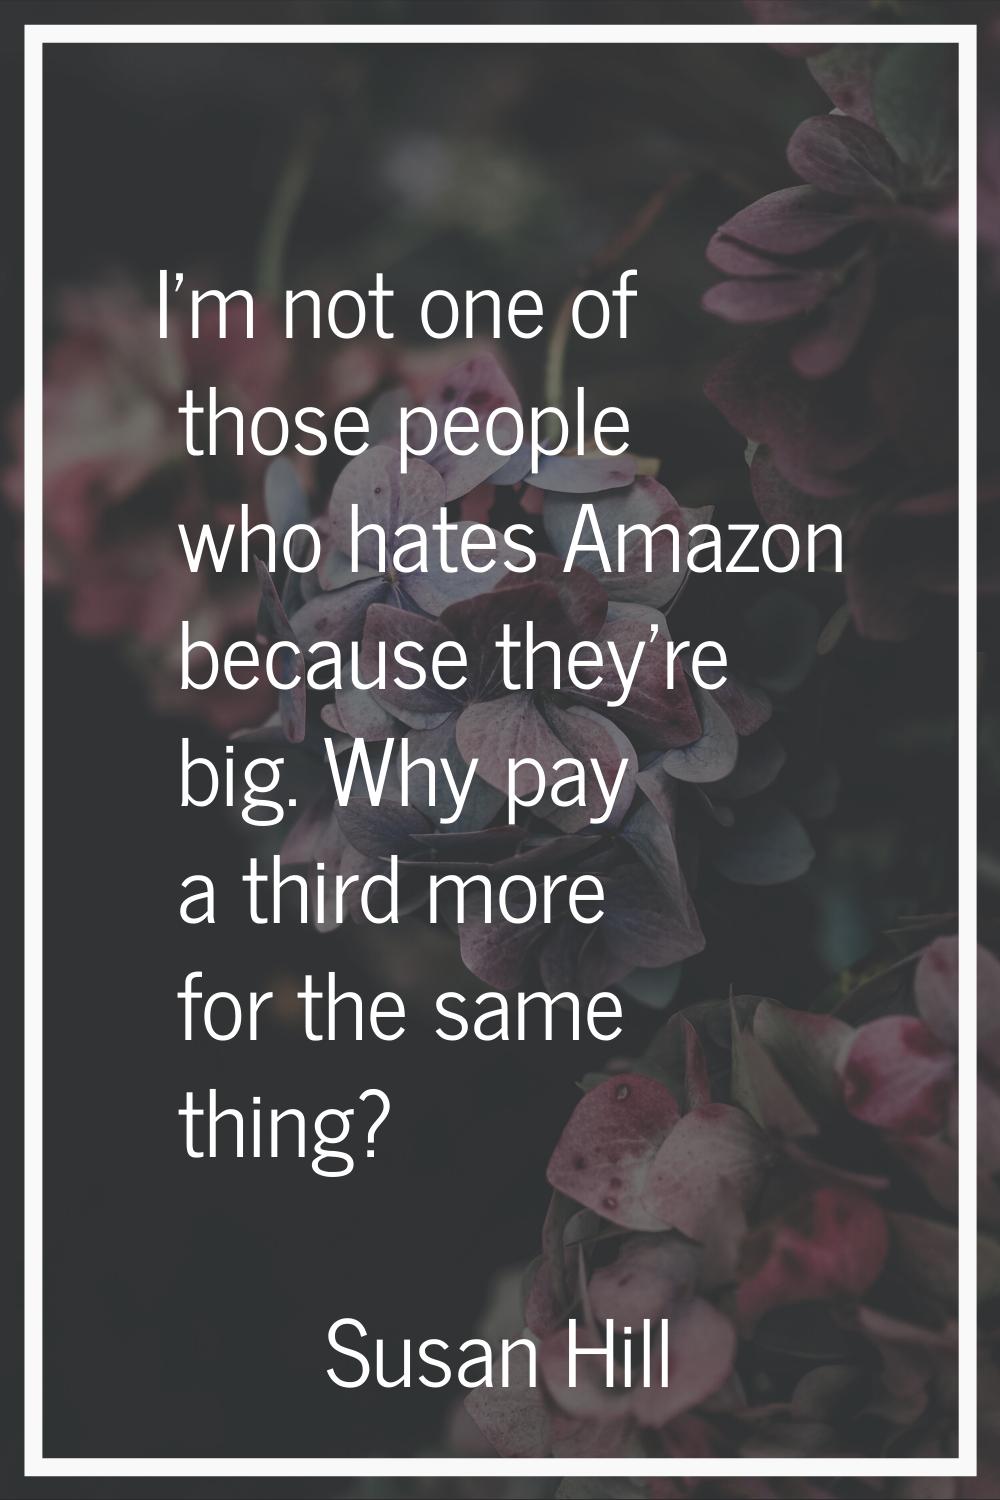 I'm not one of those people who hates Amazon because they're big. Why pay a third more for the same